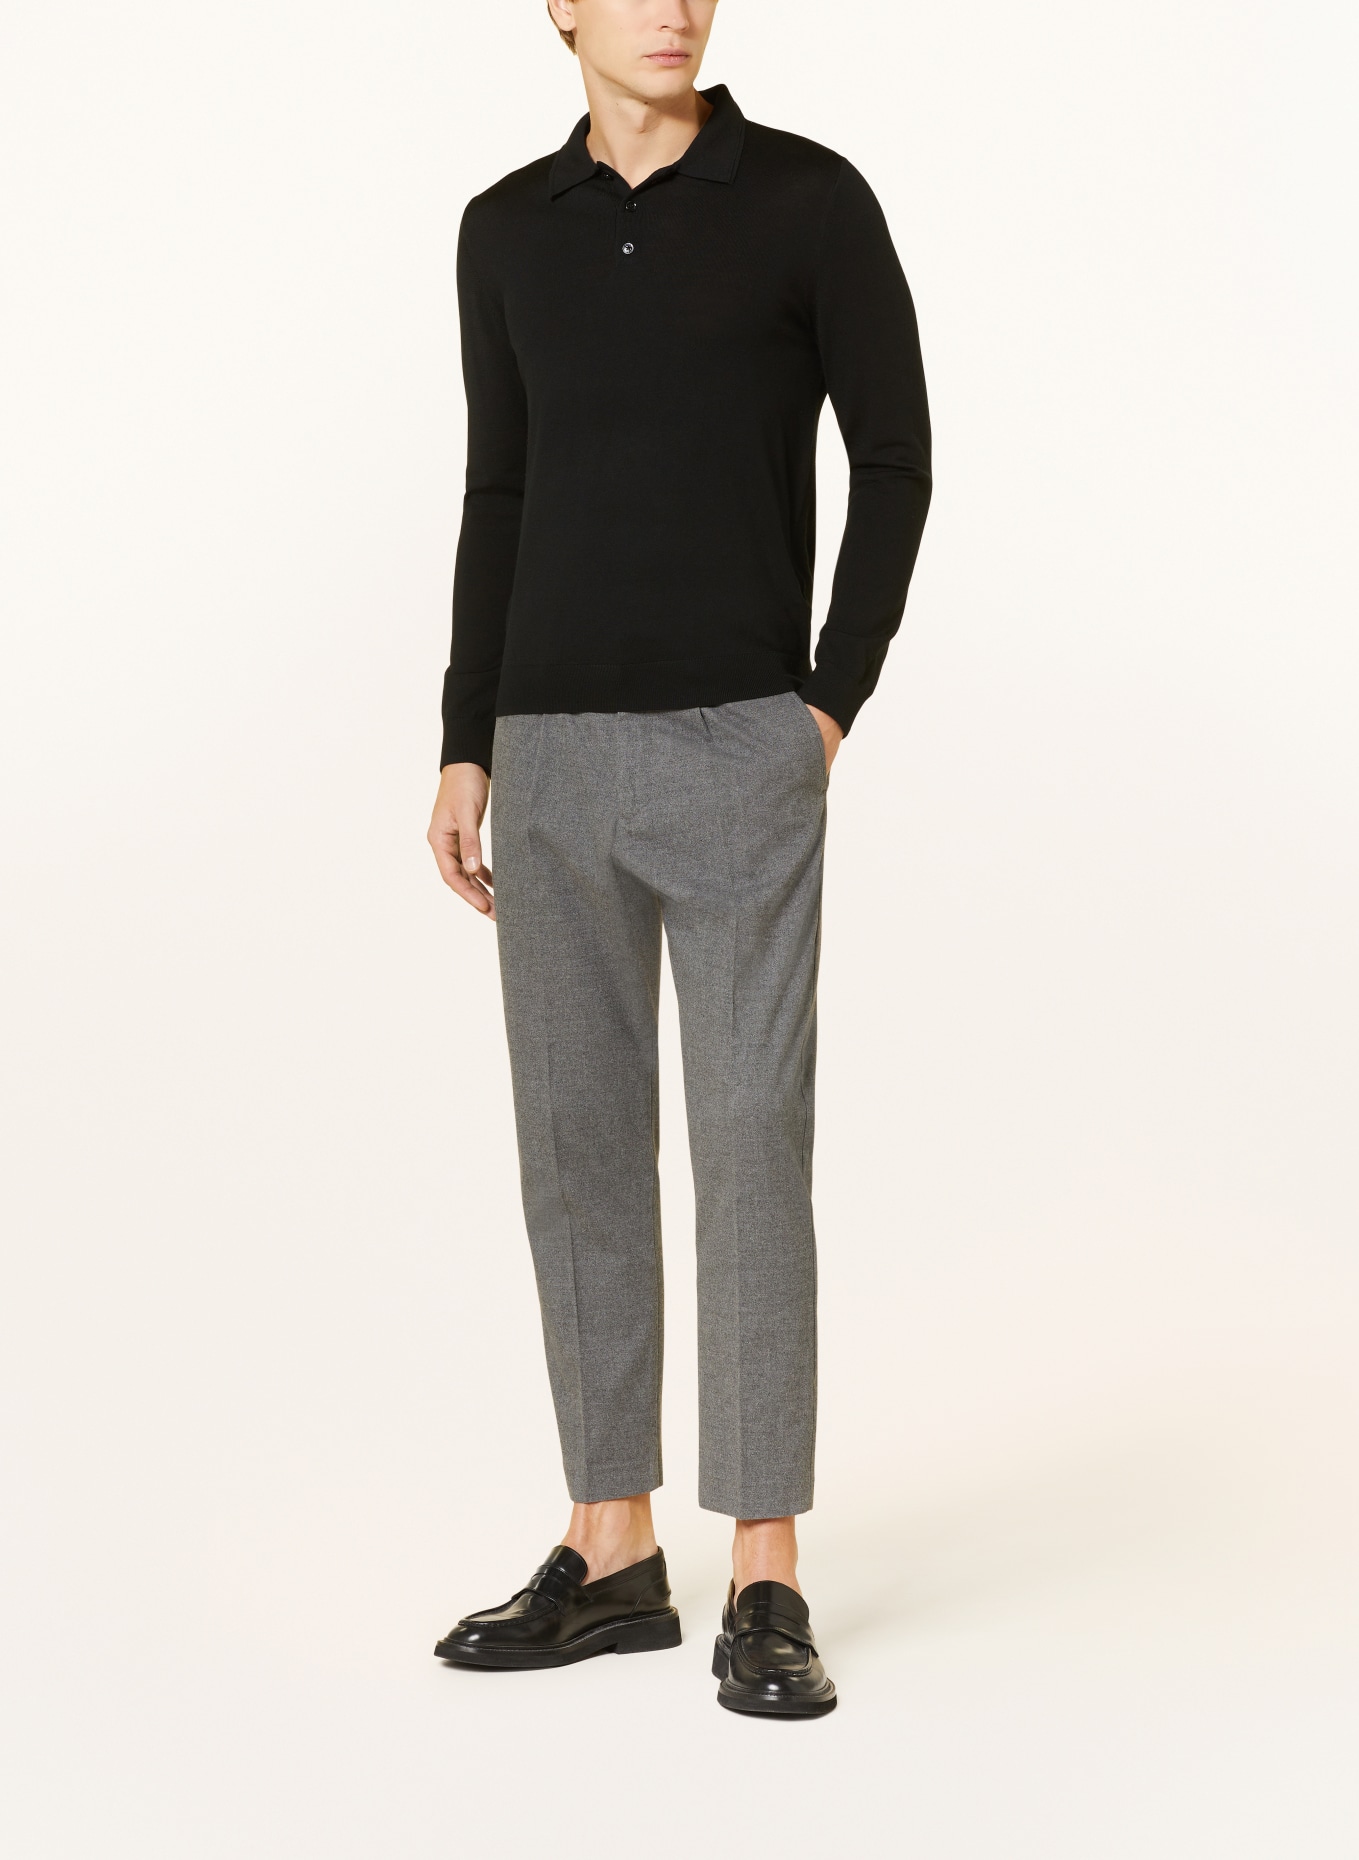 REISS Knitted polo shirt TRAFFORD made of merino wool, Color: BLACK (Image 2)